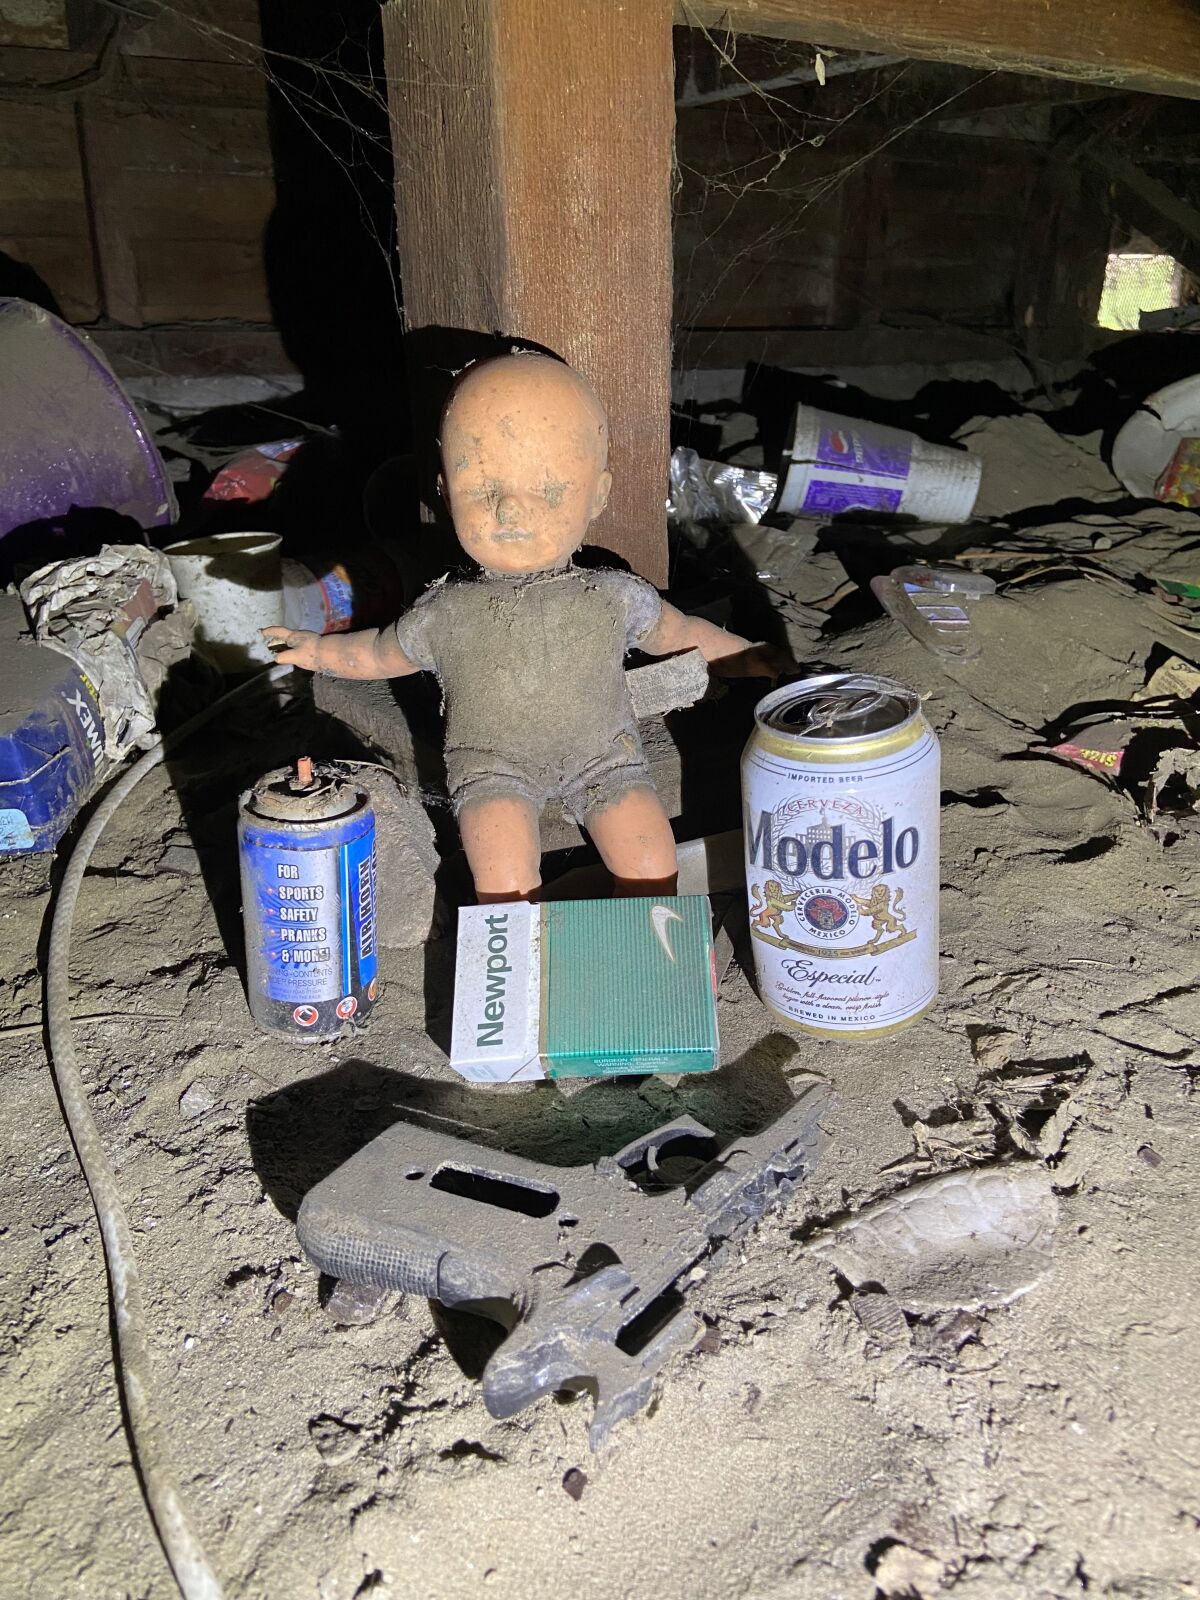 A doll, a beer can, a toy gun, a pack of cigarettes and other items in a crawl space.